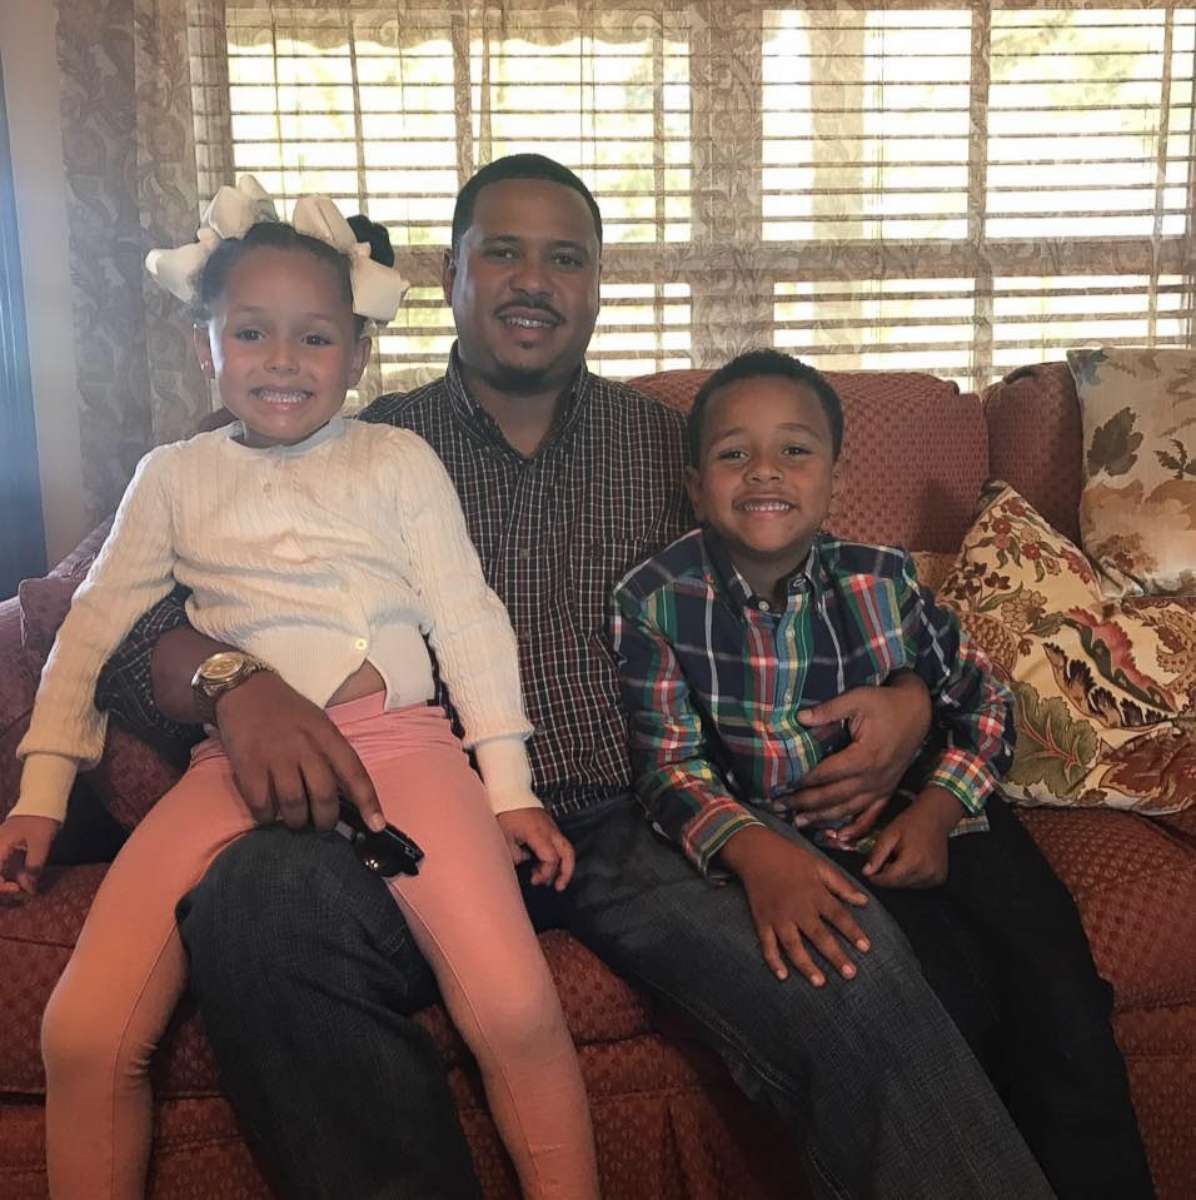 PHOTO: Eddie Lewis III poses with his children in this undated family photo.